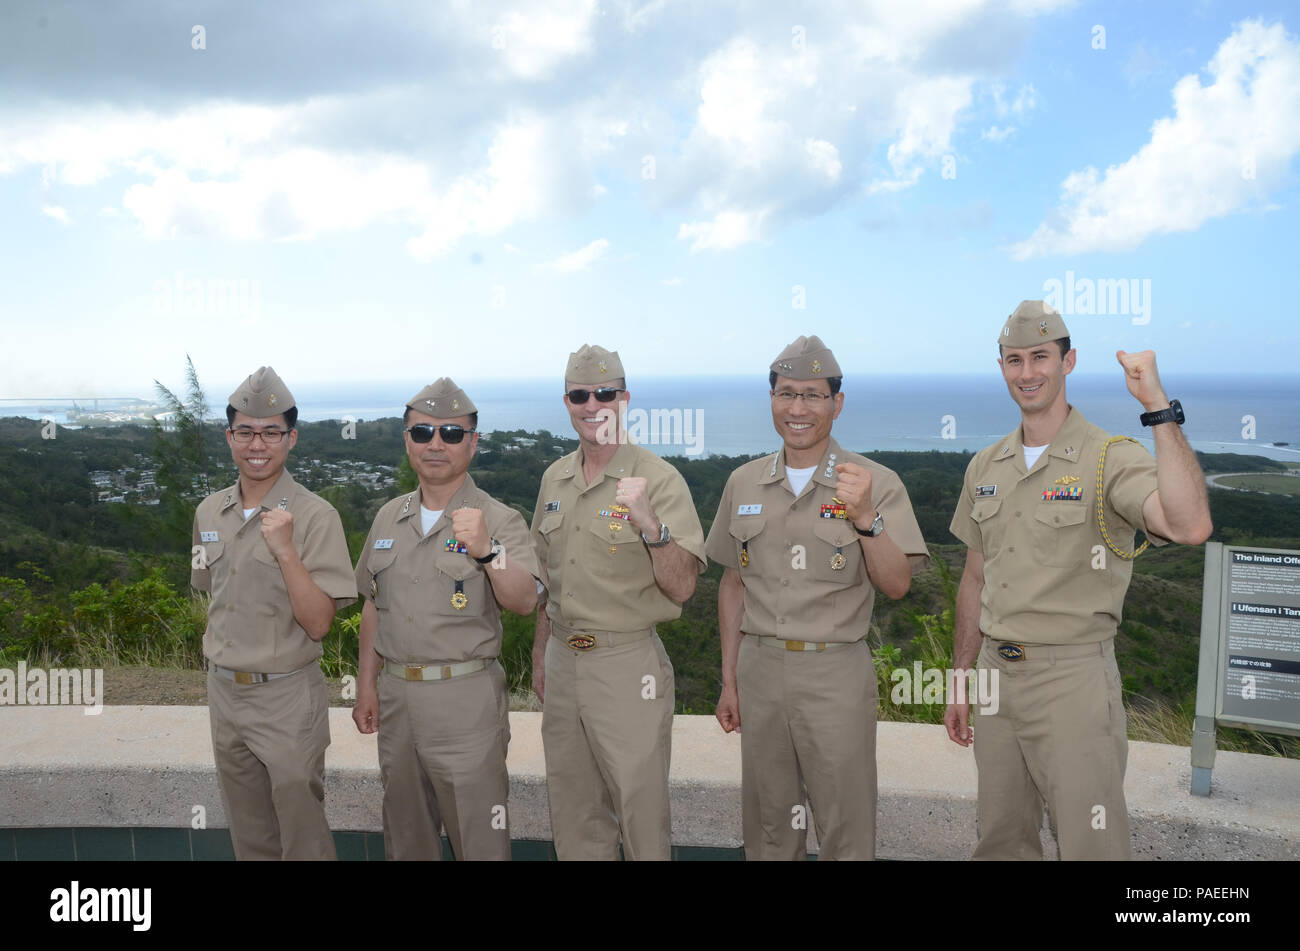 160331-N-YM720-239 SANTA RITA, Guam (March 31, 2016) Members of the U.S. and Republic of Korea (ROK) submarine forces pose at the Asan Bay Overlook on Nimitz Hill after the first day of the 43rd Submarine Warfare Committee Meeting (SWCM). SWCM is a bilateral discussion between the U.S. and ROKN submarine forces designed to foster the partnership and focuses on submarine tactics, force integraton and future submarine development. (U.S. Navy photo by MC3 Allen McNair/Released) Stock Photo